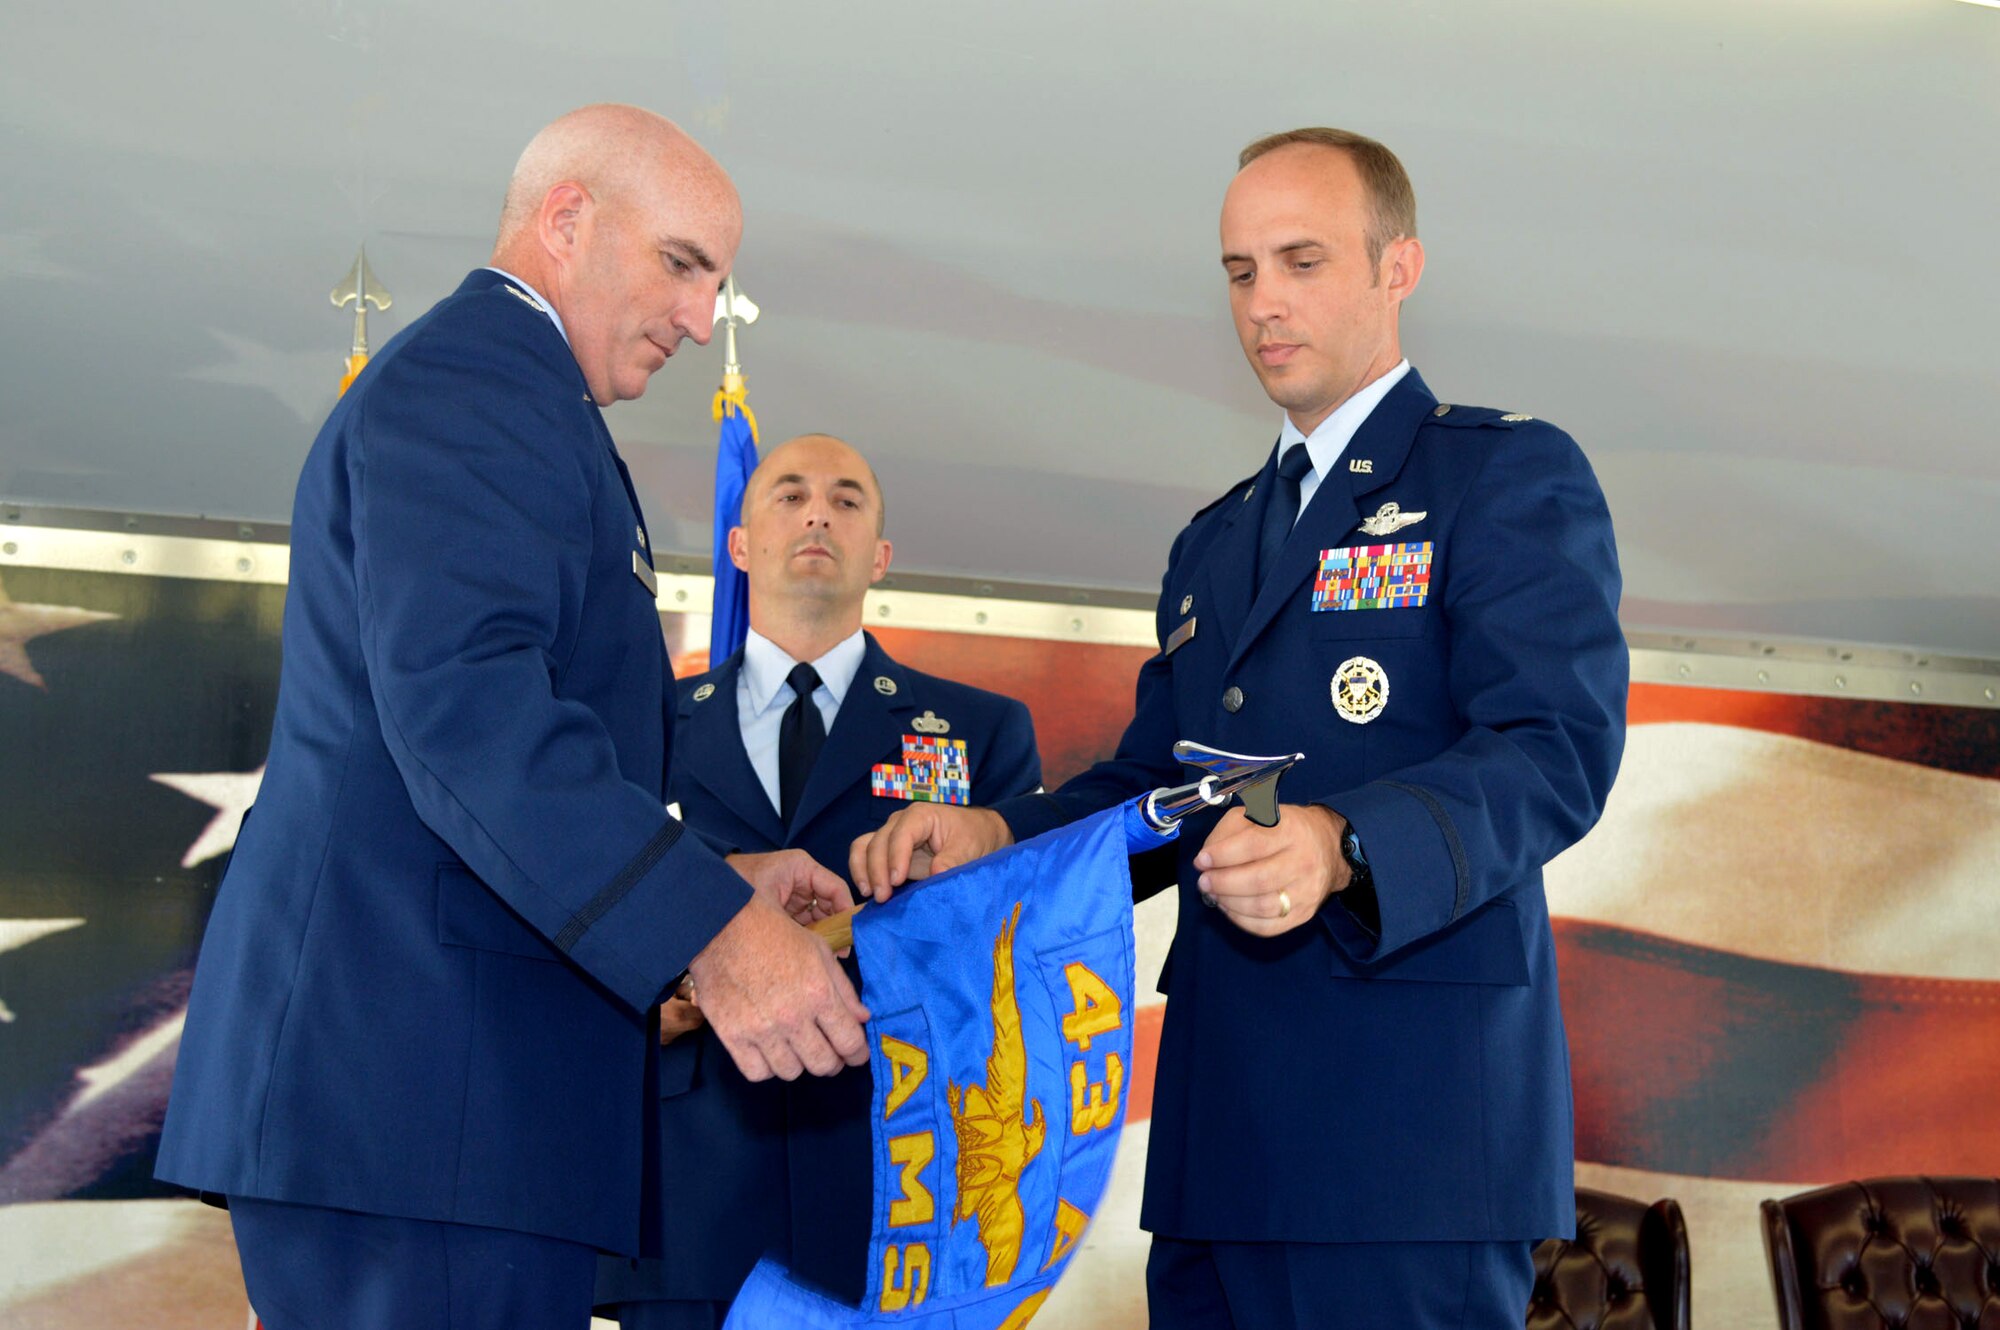 Lt. Col. David Morgan, 43rd Air Mobility Squadron commander, right, and Col. Kenneth Moss, 43rd Airlift Group commander, unfurl the 43rd Air Mobility Squadron guidon July 1, 2015, during the 43rd AMS activation ceremony at Pope Army Airfield, North Carolina. Morgan assumed command of the newly established squadron composed of aircraft maintenance and aerial port Airmen and functions transferred from the inactivated 43rd Aircraft Maintenance Squadron and the 3rd Aerial Port Squadron. (U.S. Air Force photo/Marvin Krause)